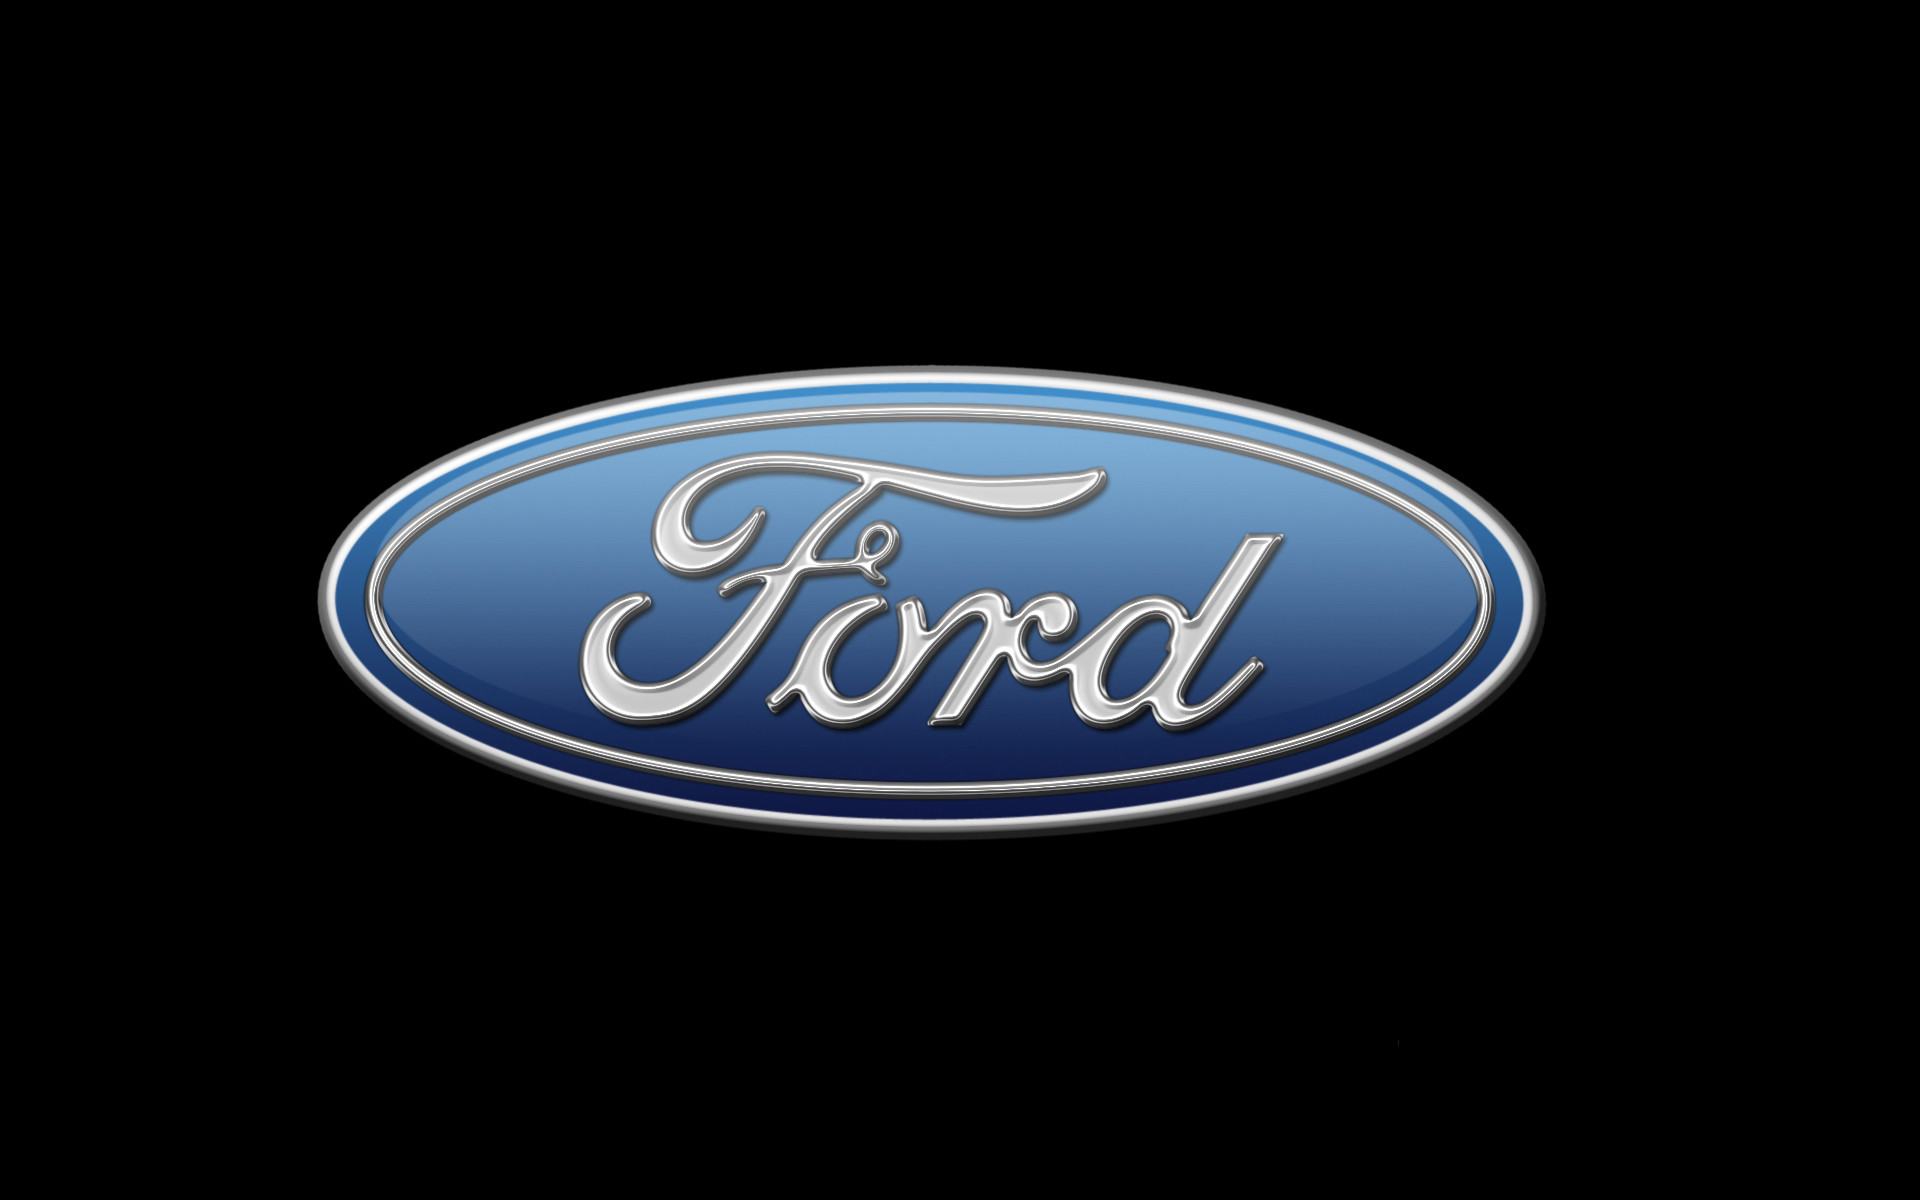 0 Collection of Ford Emblem Wallpaper on HDWallpapers Collection of Ford Wallpaper on HDWallpapers